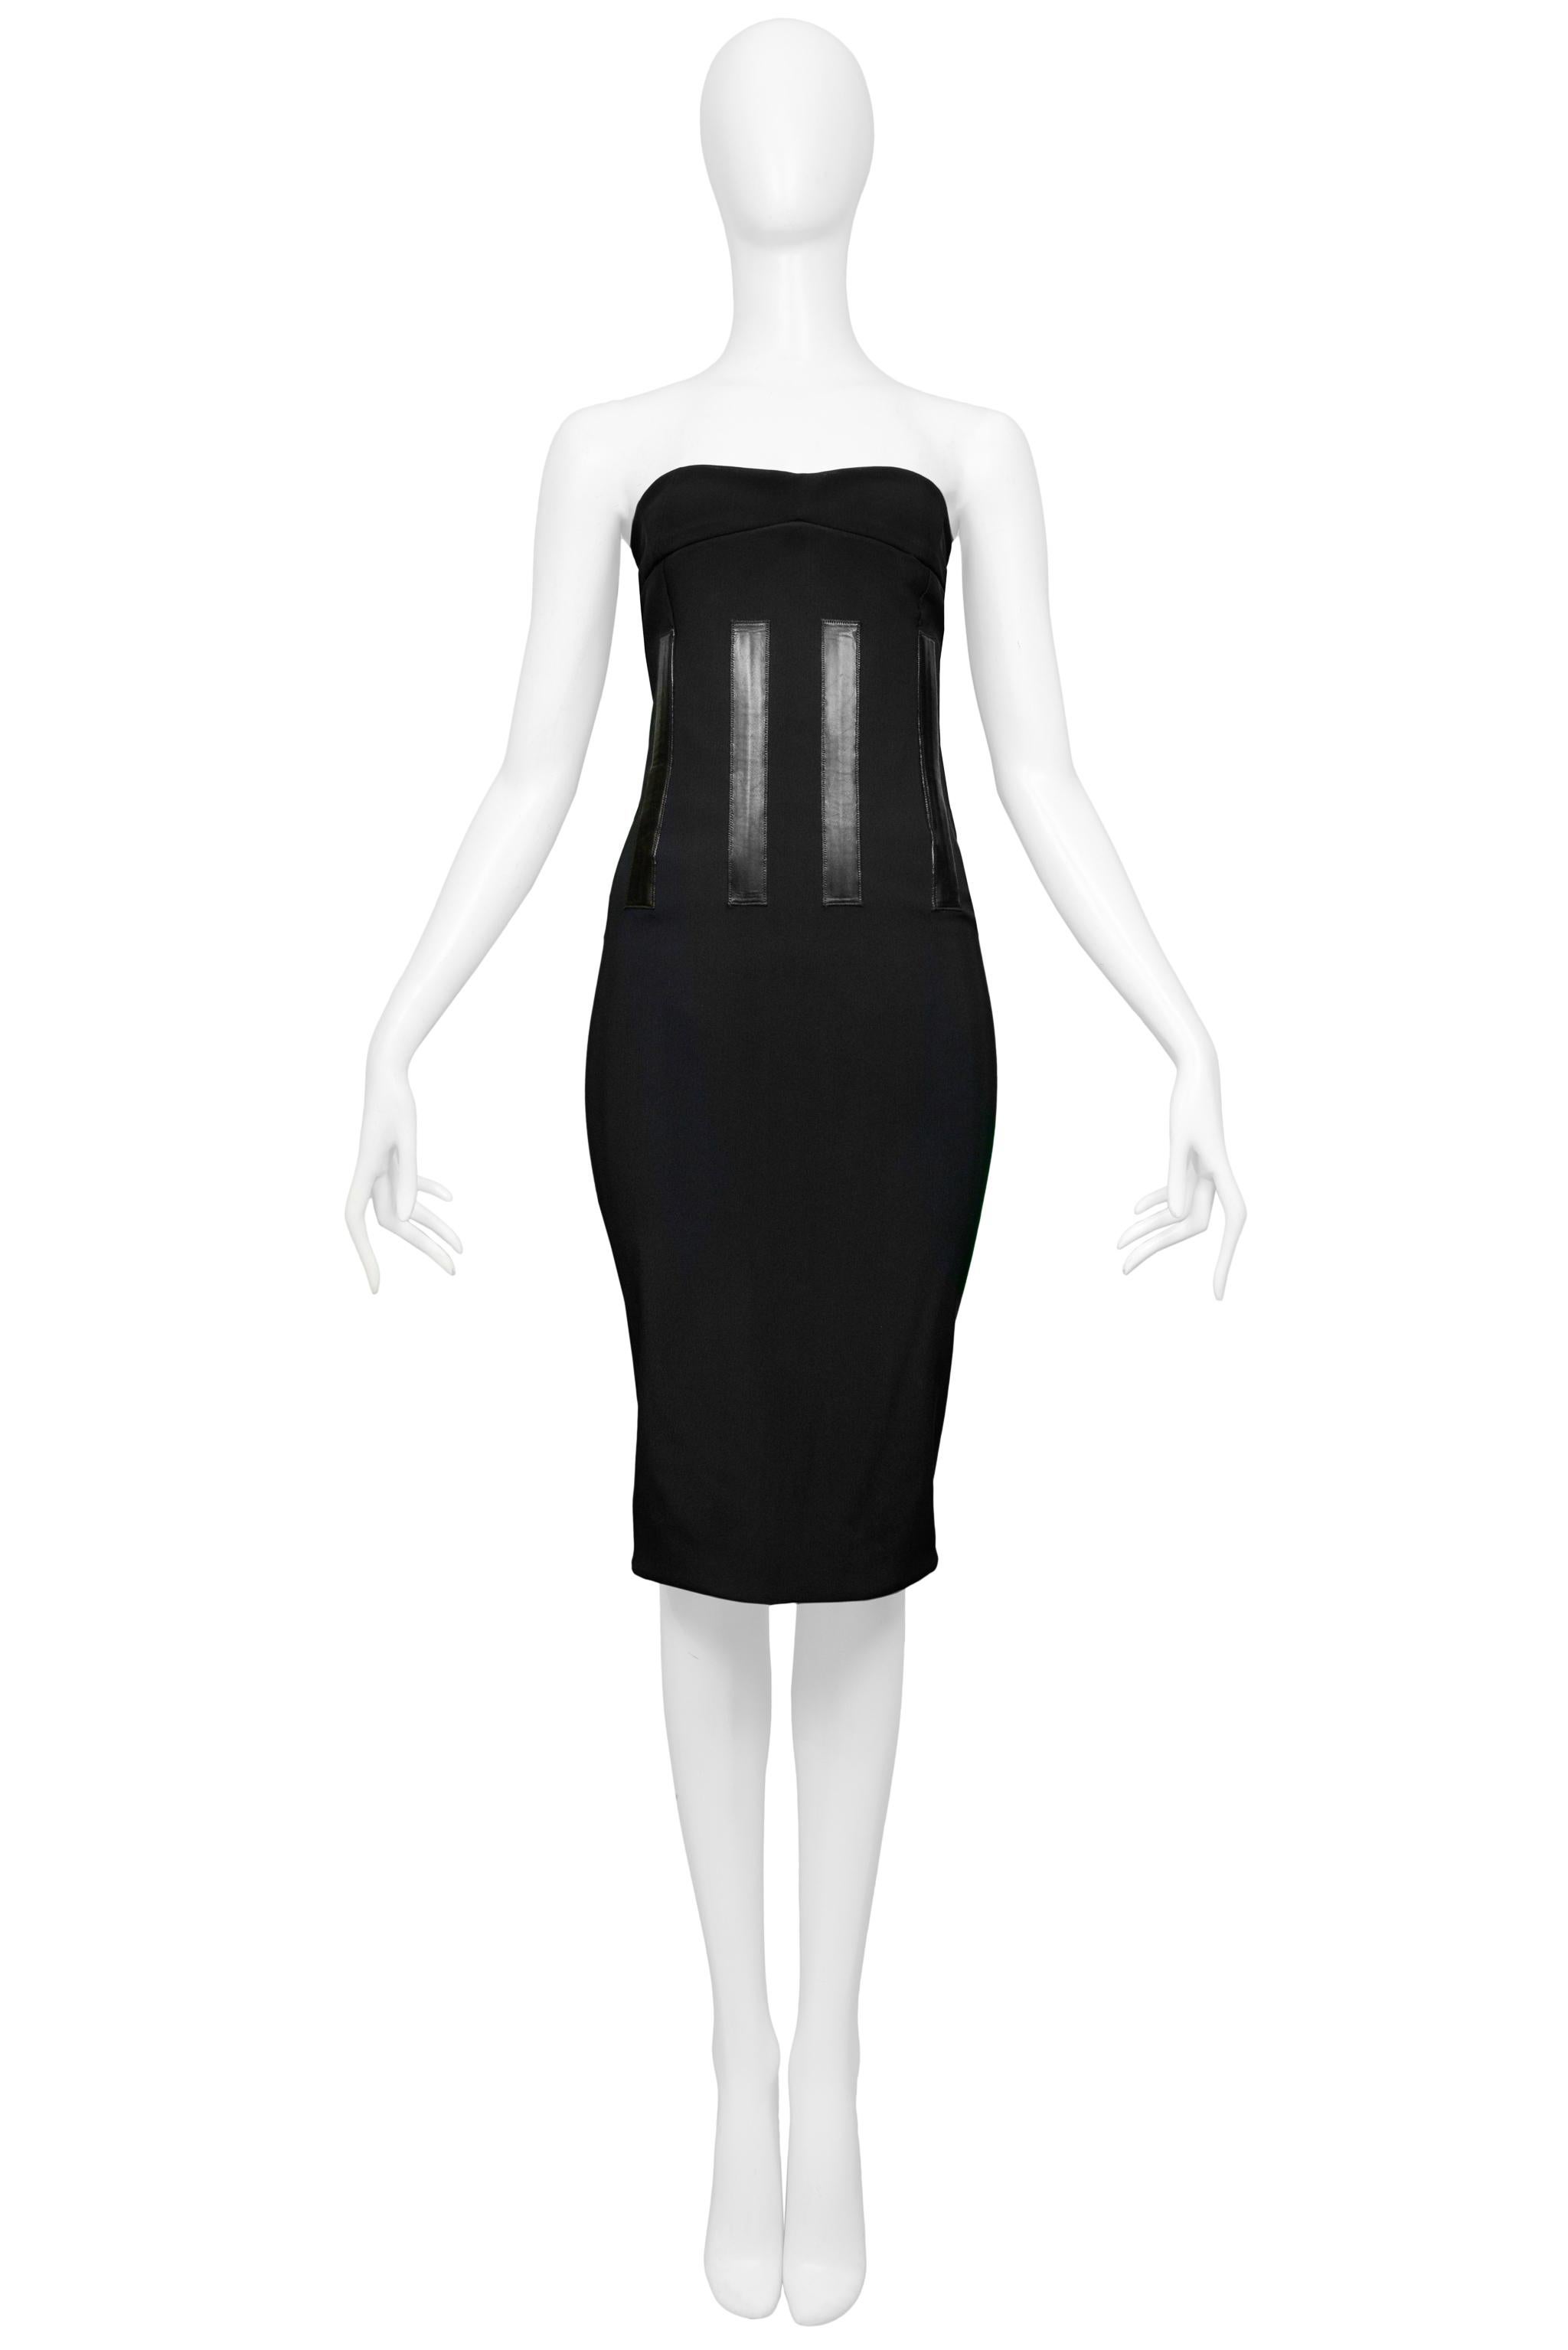 Resurrection Vintage is excited to offer a vintage black Tom Ford for Gucci strapless runway dress featuring a fitted body, leather detailing, and center back slit and zipper closure with Gucci pull.

Gucci
Designed by Tom Ford
Size 42 
2001